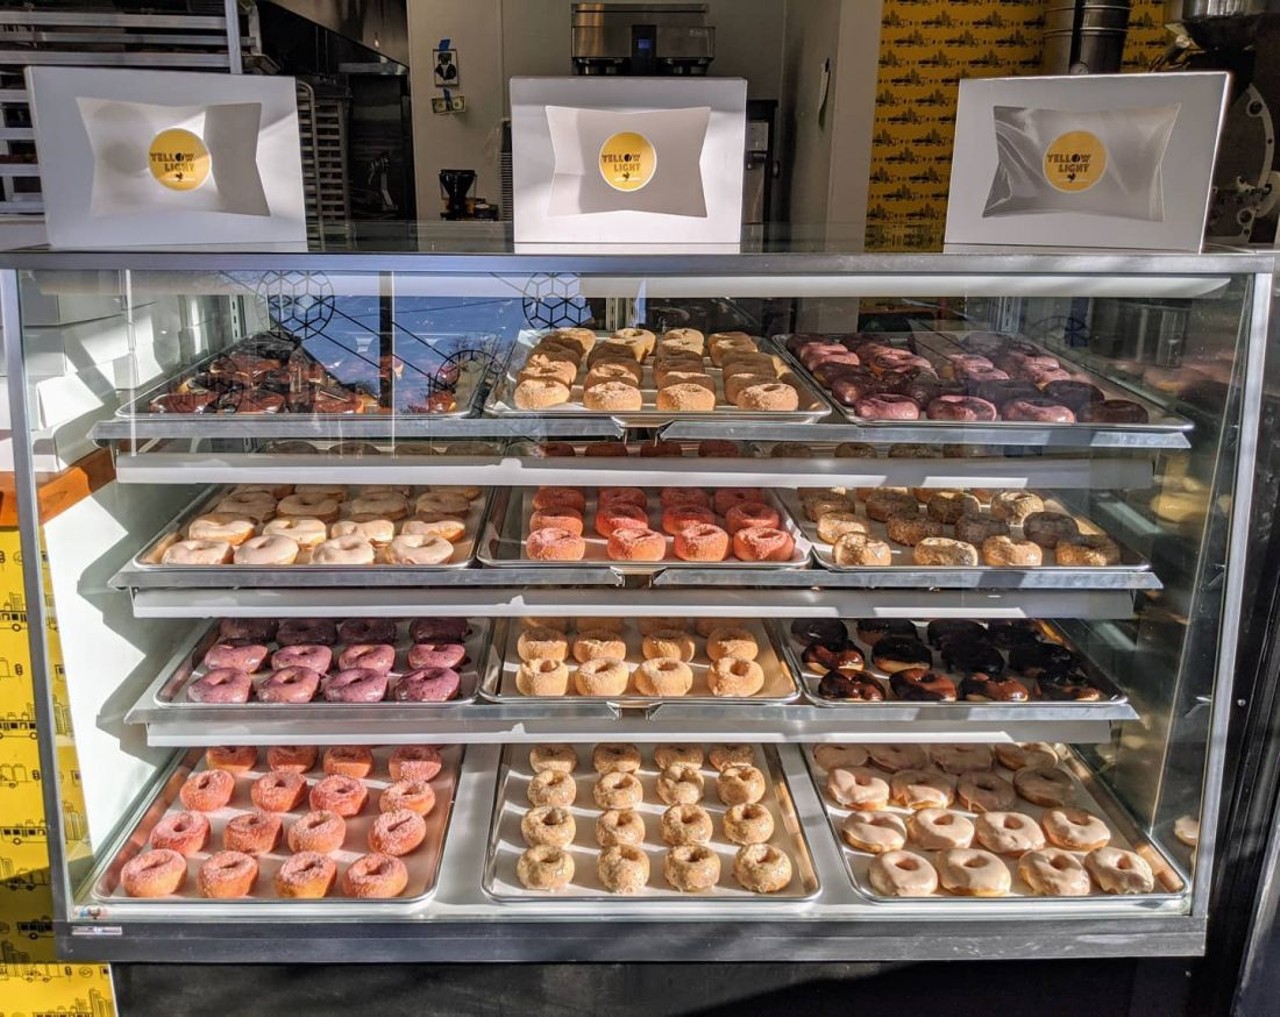 Yellow Light Coffee & Donuts 
14447 E. Jefferson Ave., Detroit;  yellowlightdetroit.com  
Yellow Light Coffee & Donuts has been in the works since October 2019 and is the latest culinary project from Jacques and Christine Driscoll, who co-own successful Detroit eateries Green Dot Stables and Johnny Noodle King. Friend, artist, and coffee roaster Niko Dimitrijevic join Yellow Light, who returned to Detroit after working in Seattle as a glassblower. In addition to in-house roasted brew, their menu offers a selection of uniquely flavored doughnuts, such as Mai Tai, blueberry maple, orange sugar, hibiscus lime, brown butter plantain, and coconut. Oh, and they have a drive-thru. 
Photo via Yellow Light Coffee & Donuts/Facebook